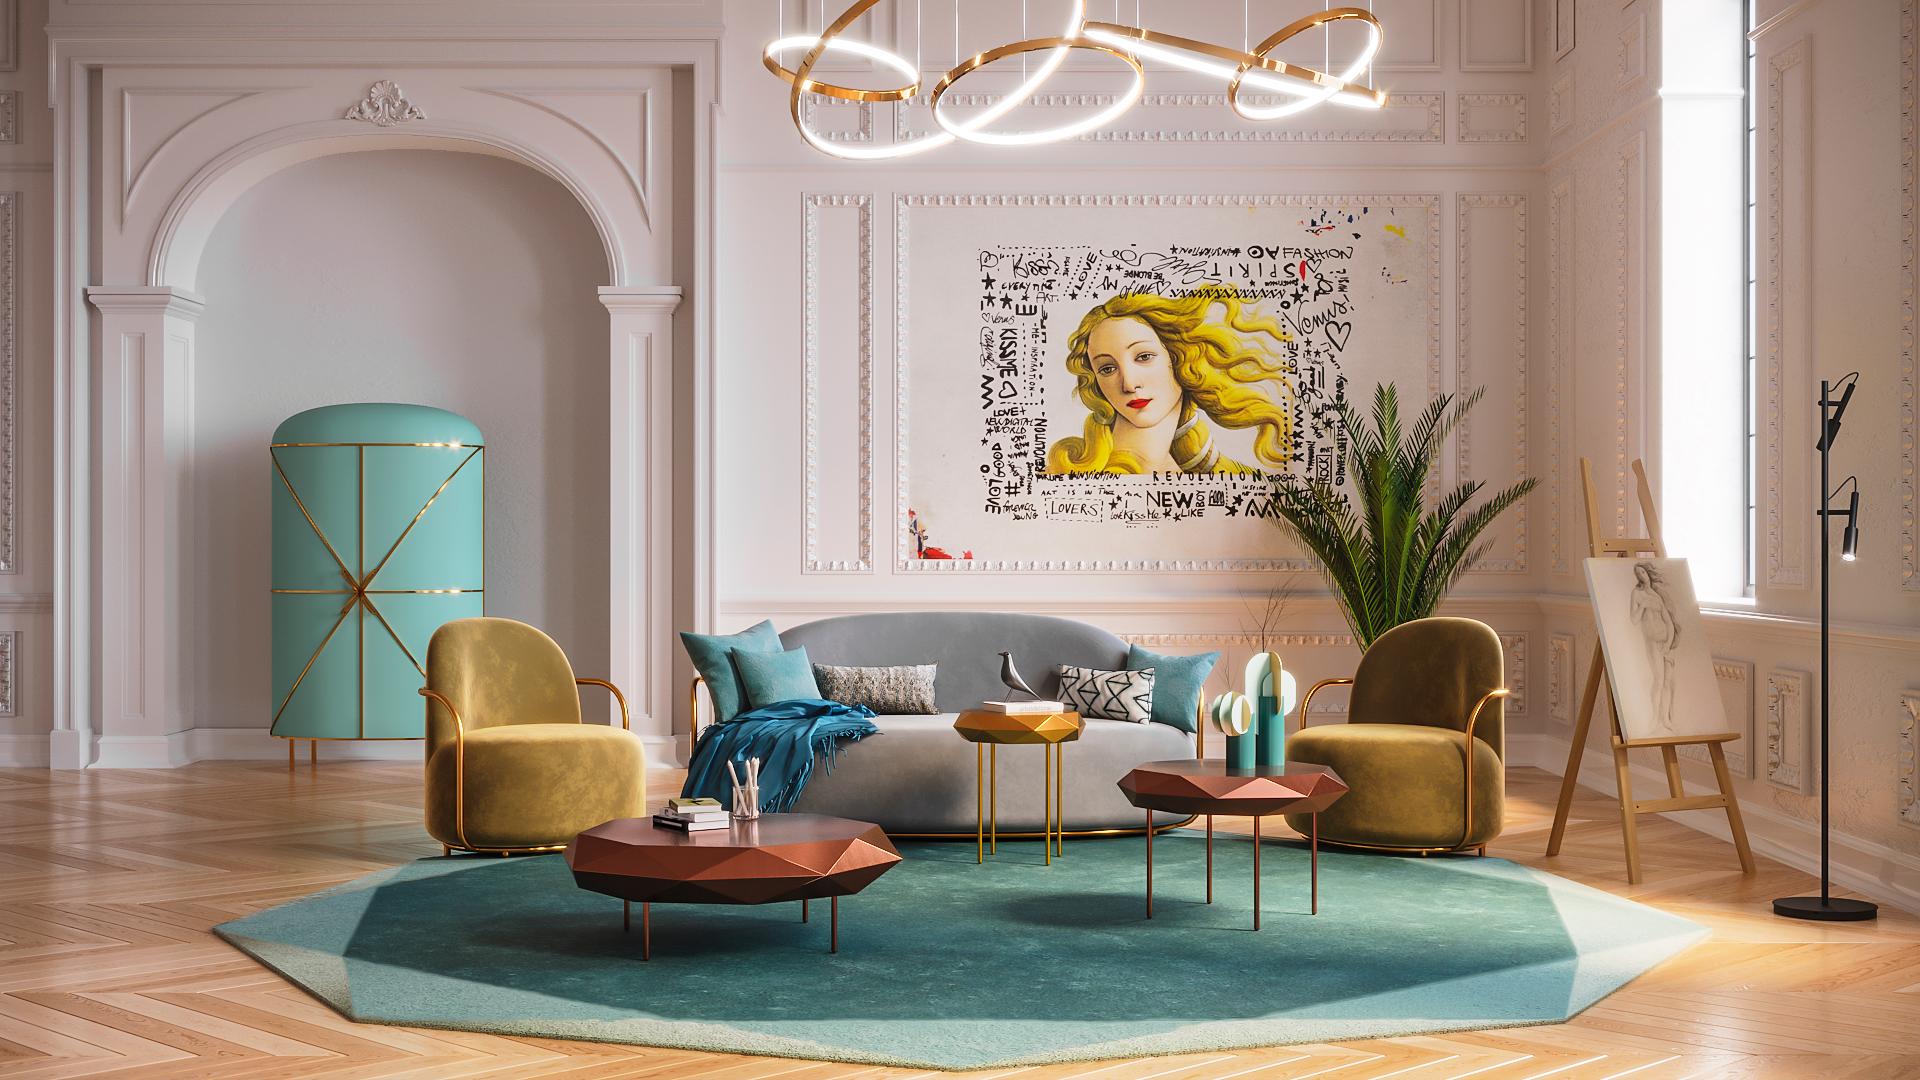 Stella Medium Coffee Table Rose Gold by Nika Zupanc is a circular table in metal with a starry edge, delightful in any interior space. Available in gold or rose gold. 

Nika Zupanc, a strikingly renowned Slovenian designer, never shies away from